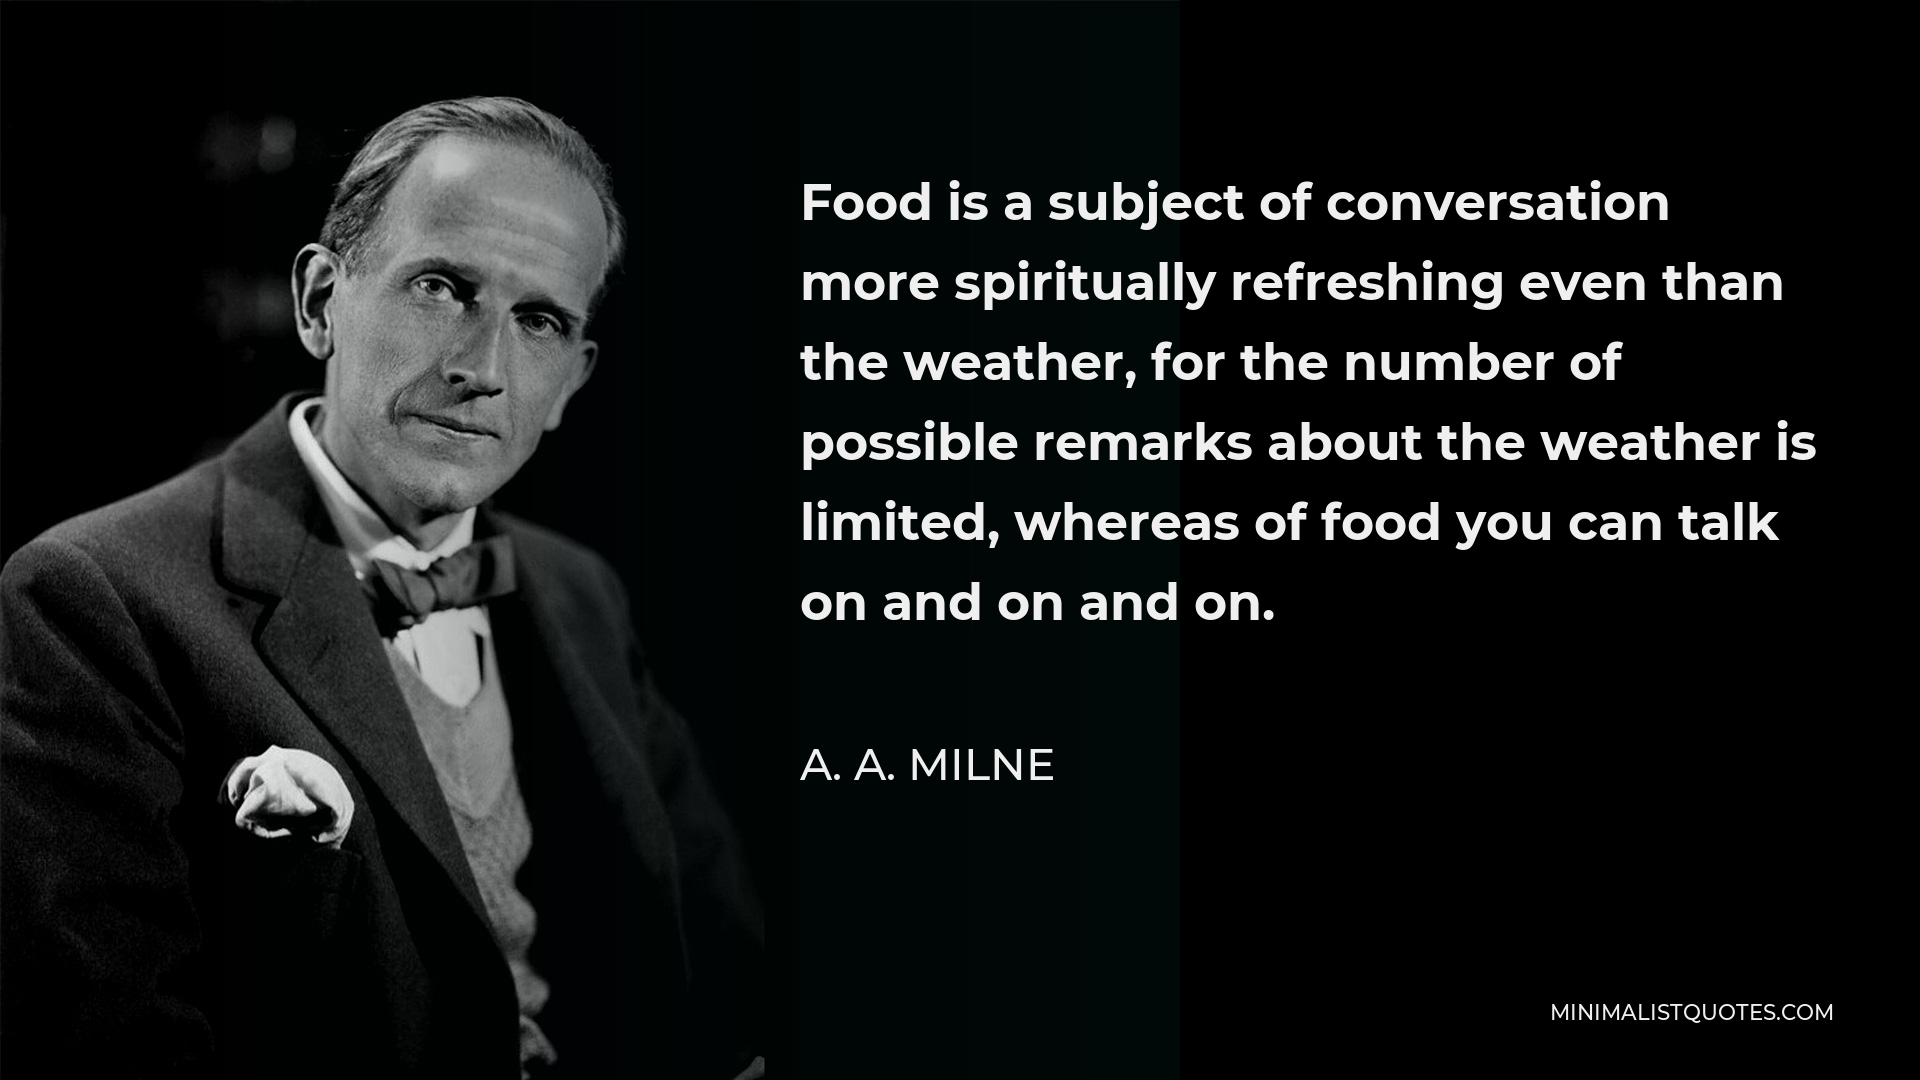 A. A. Milne Quote - Food is a subject of conversation more spiritually refreshing even than the weather, for the number of possible remarks about the weather is limited, whereas of food you can talk on and on and on.